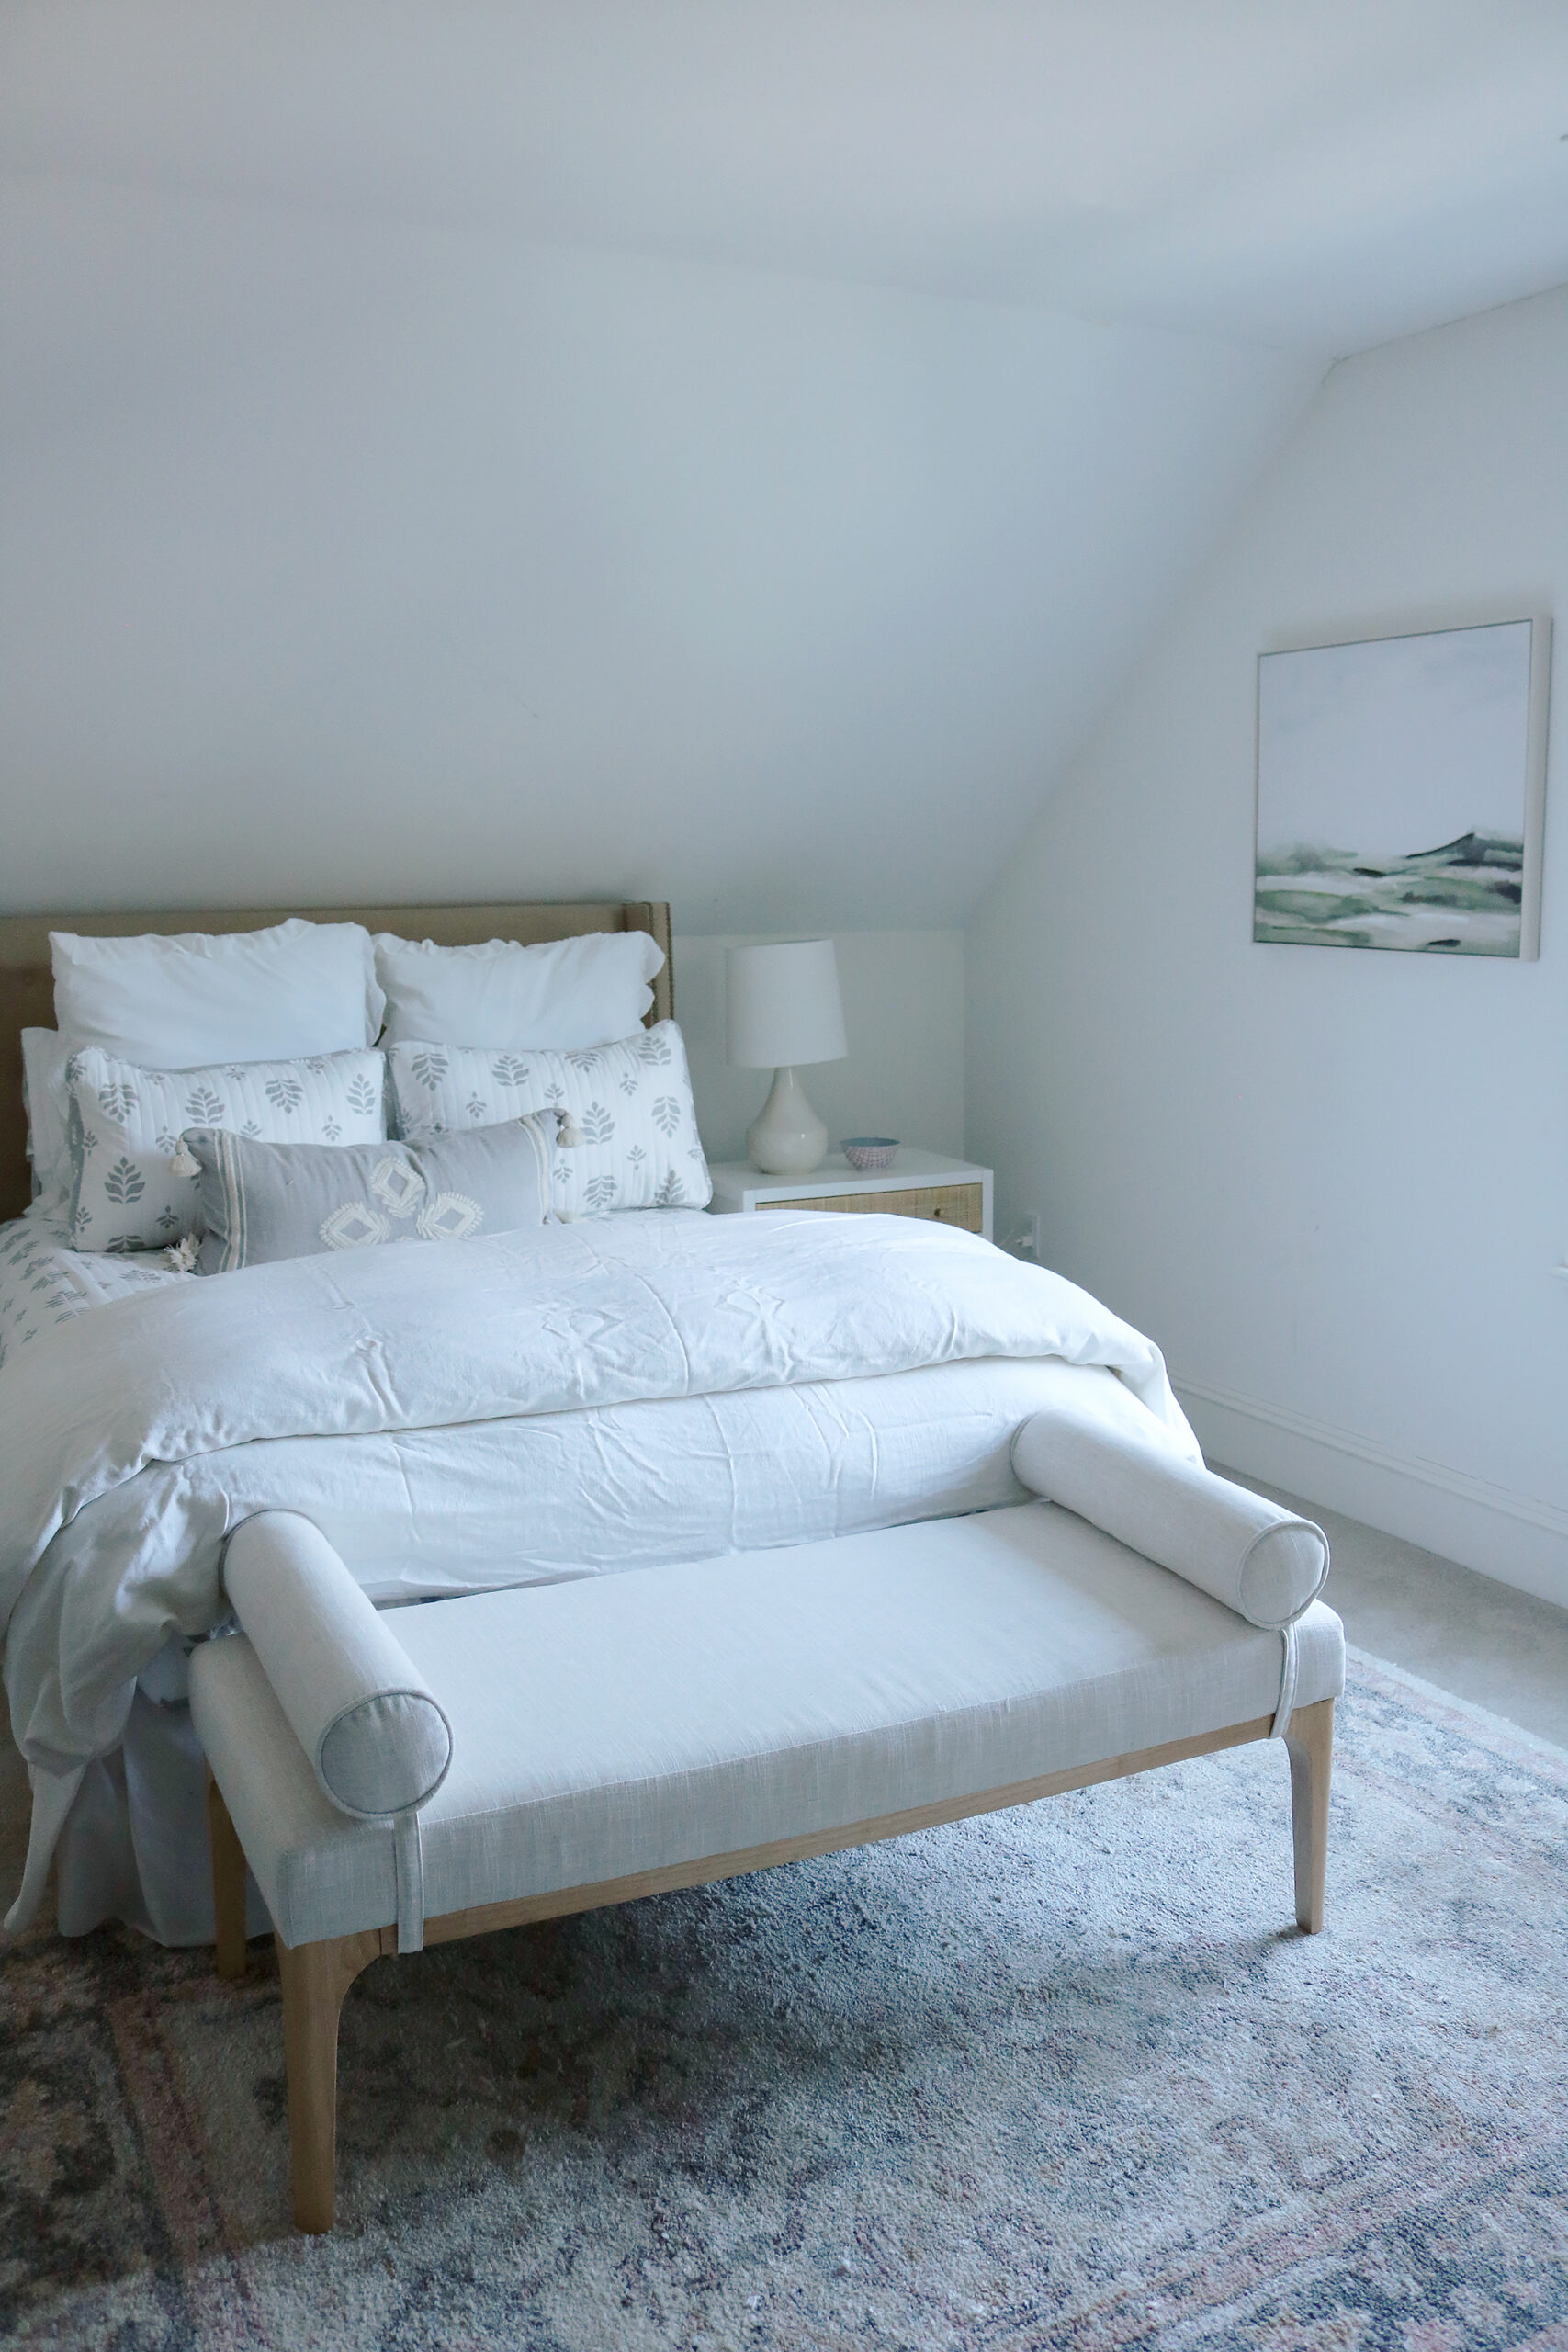 An instant Guest bedroom update with New Bedding, Lamp and Artwork. This will make the room inviting and a place where guests feel welcomed. || Darling Darleen Top Lifestyle Blogger